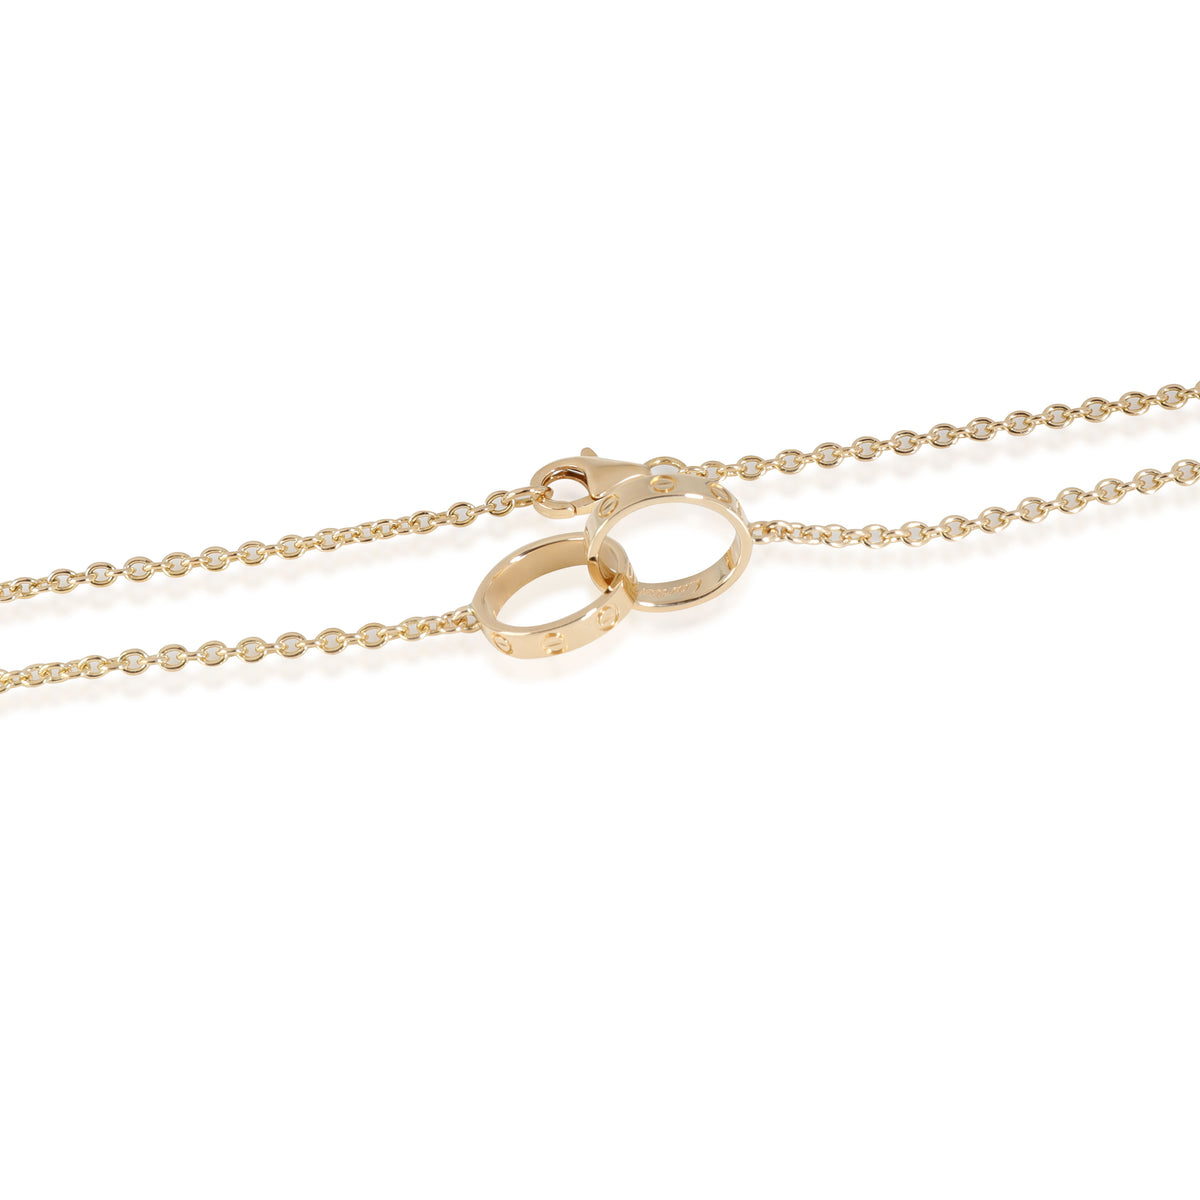 Cartier LOVE Necklace in 18k Yellow Gold